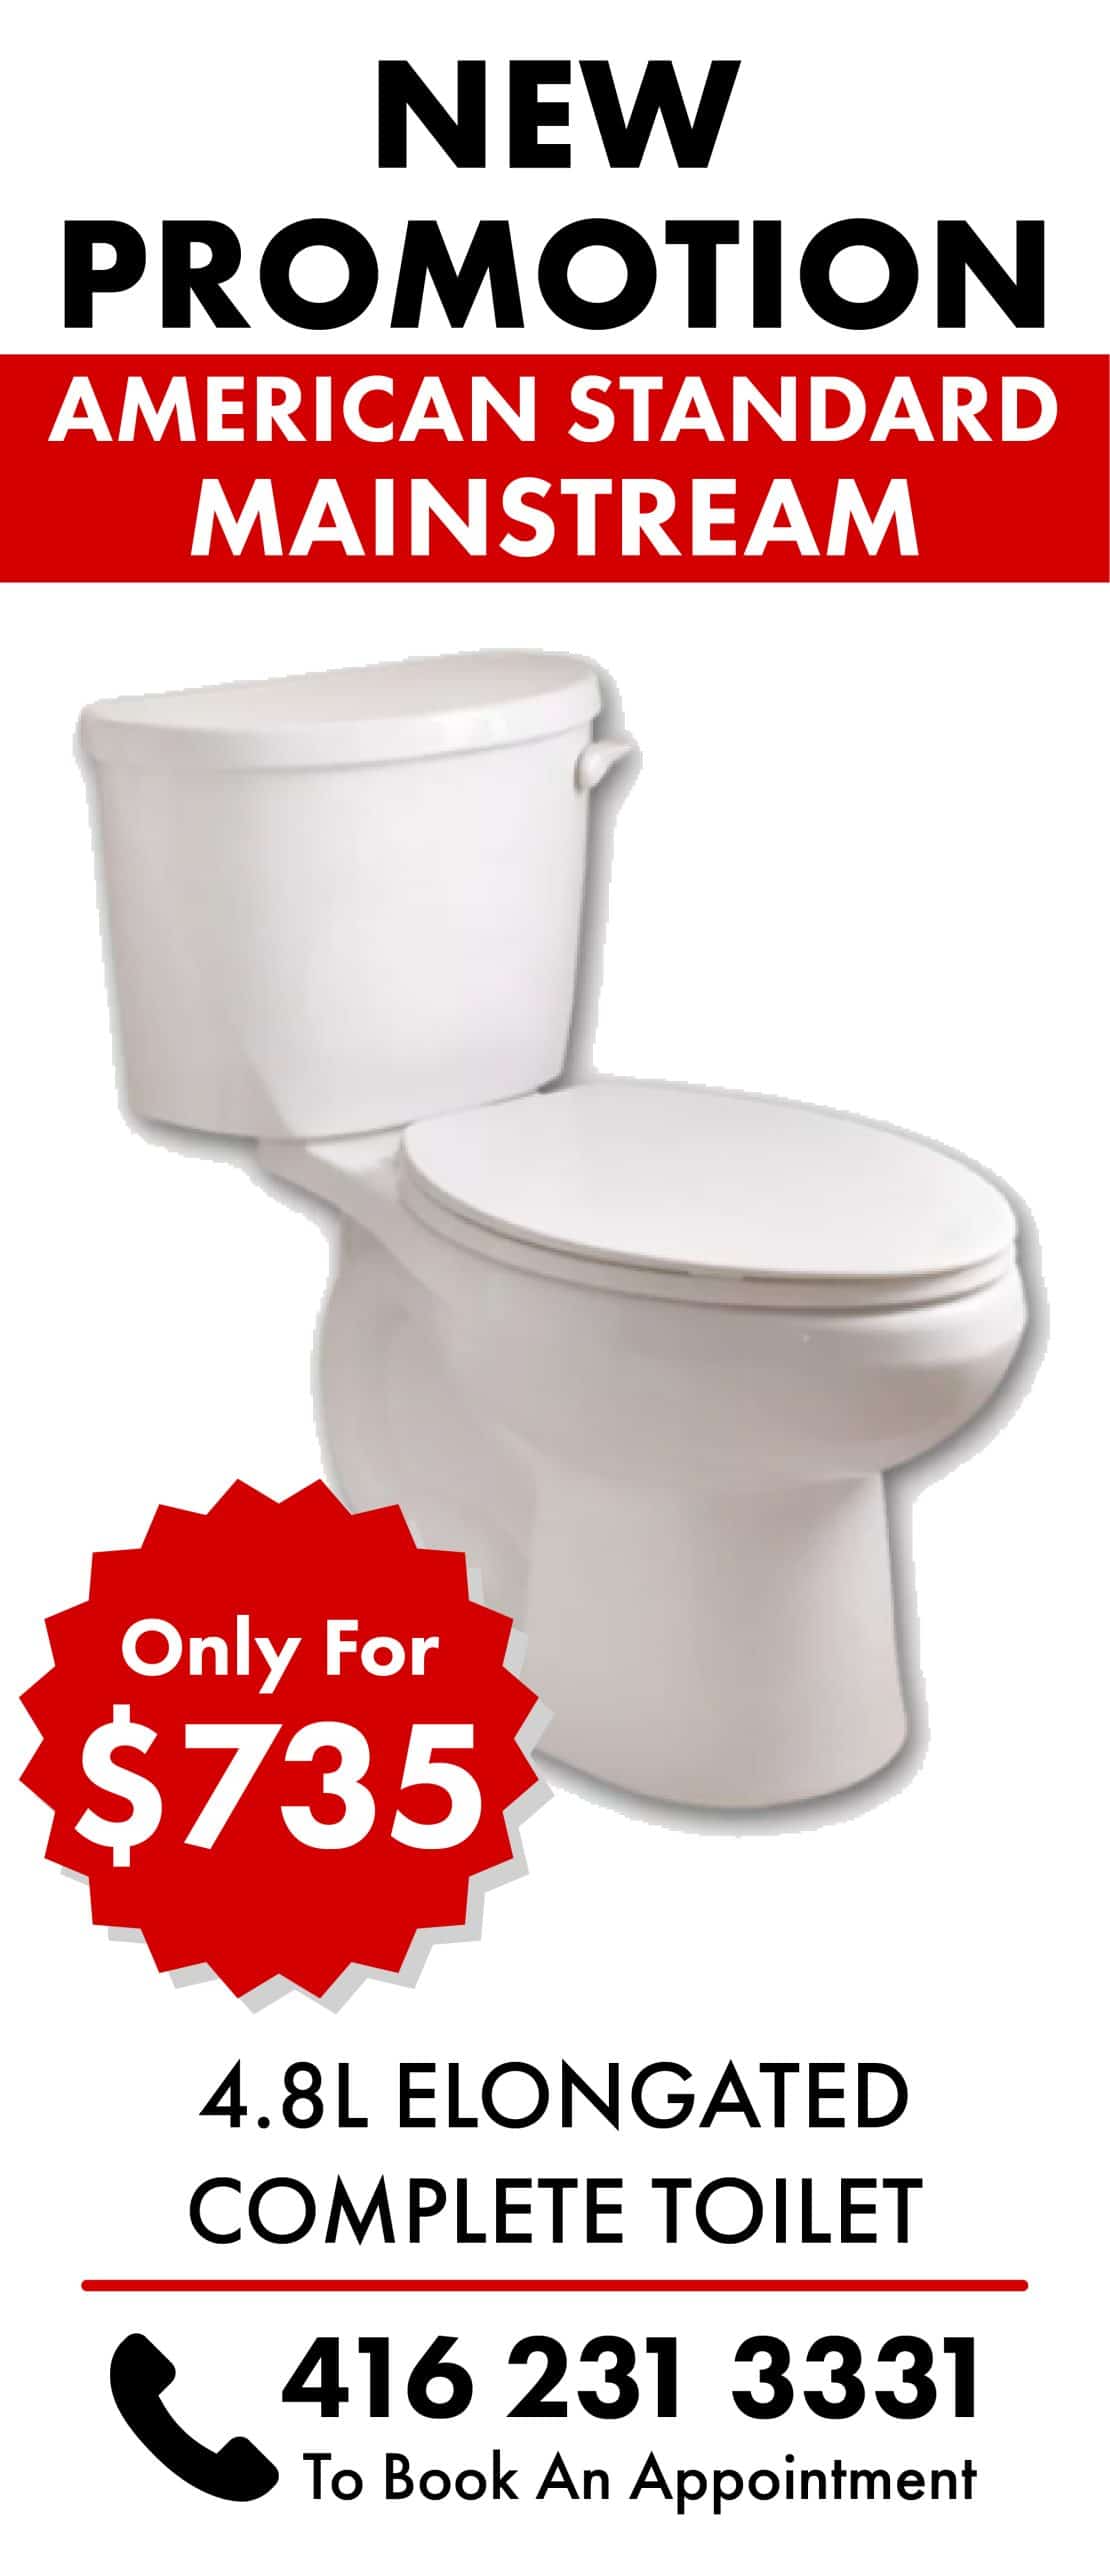 American Standard Mainstream 4.8L Elongated Complete Toilet